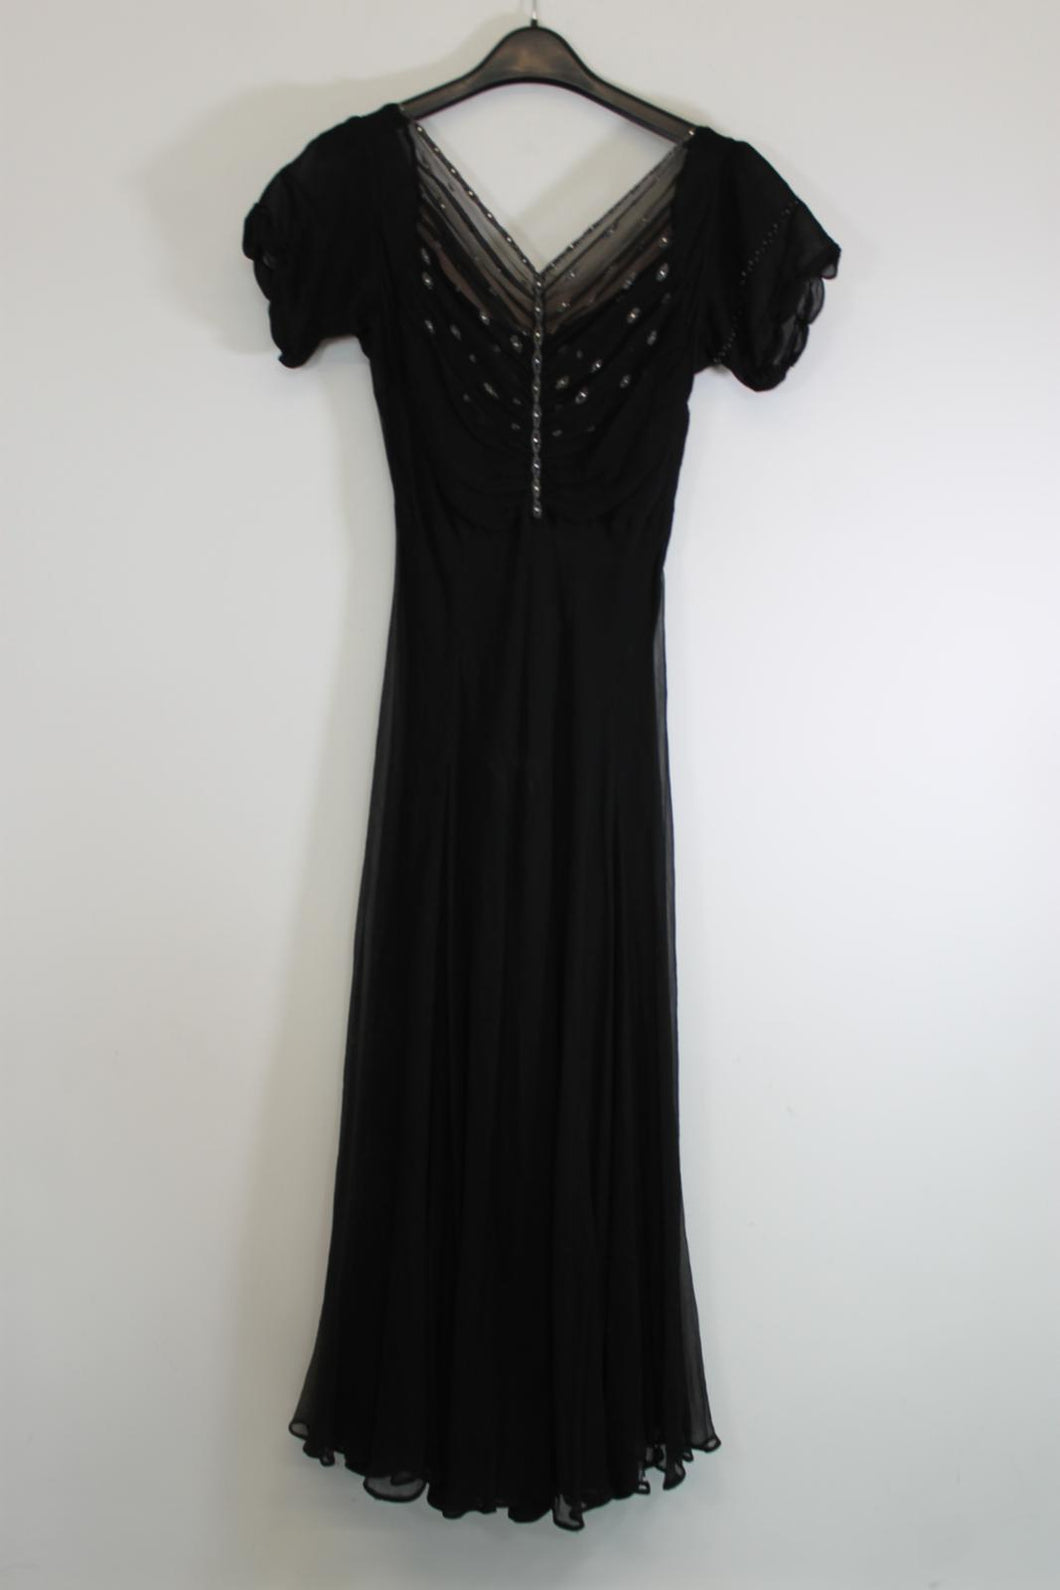 Ladies Black Embroidered Detail Short Sleeve Long Cocktail Dress Approx. Size M